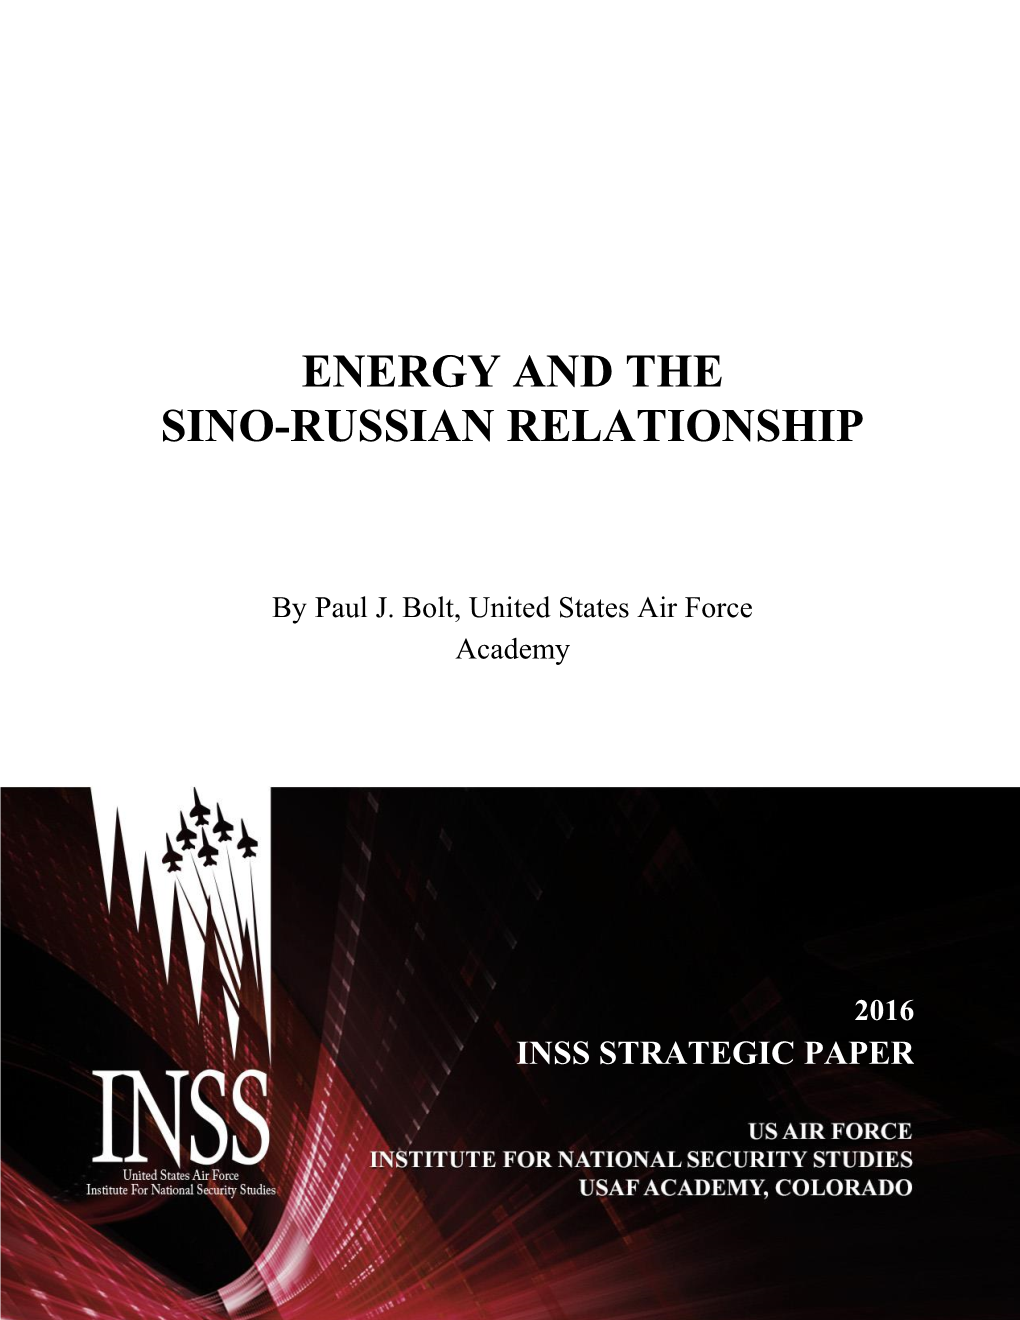 Energy and the Sino-Russian Relationship